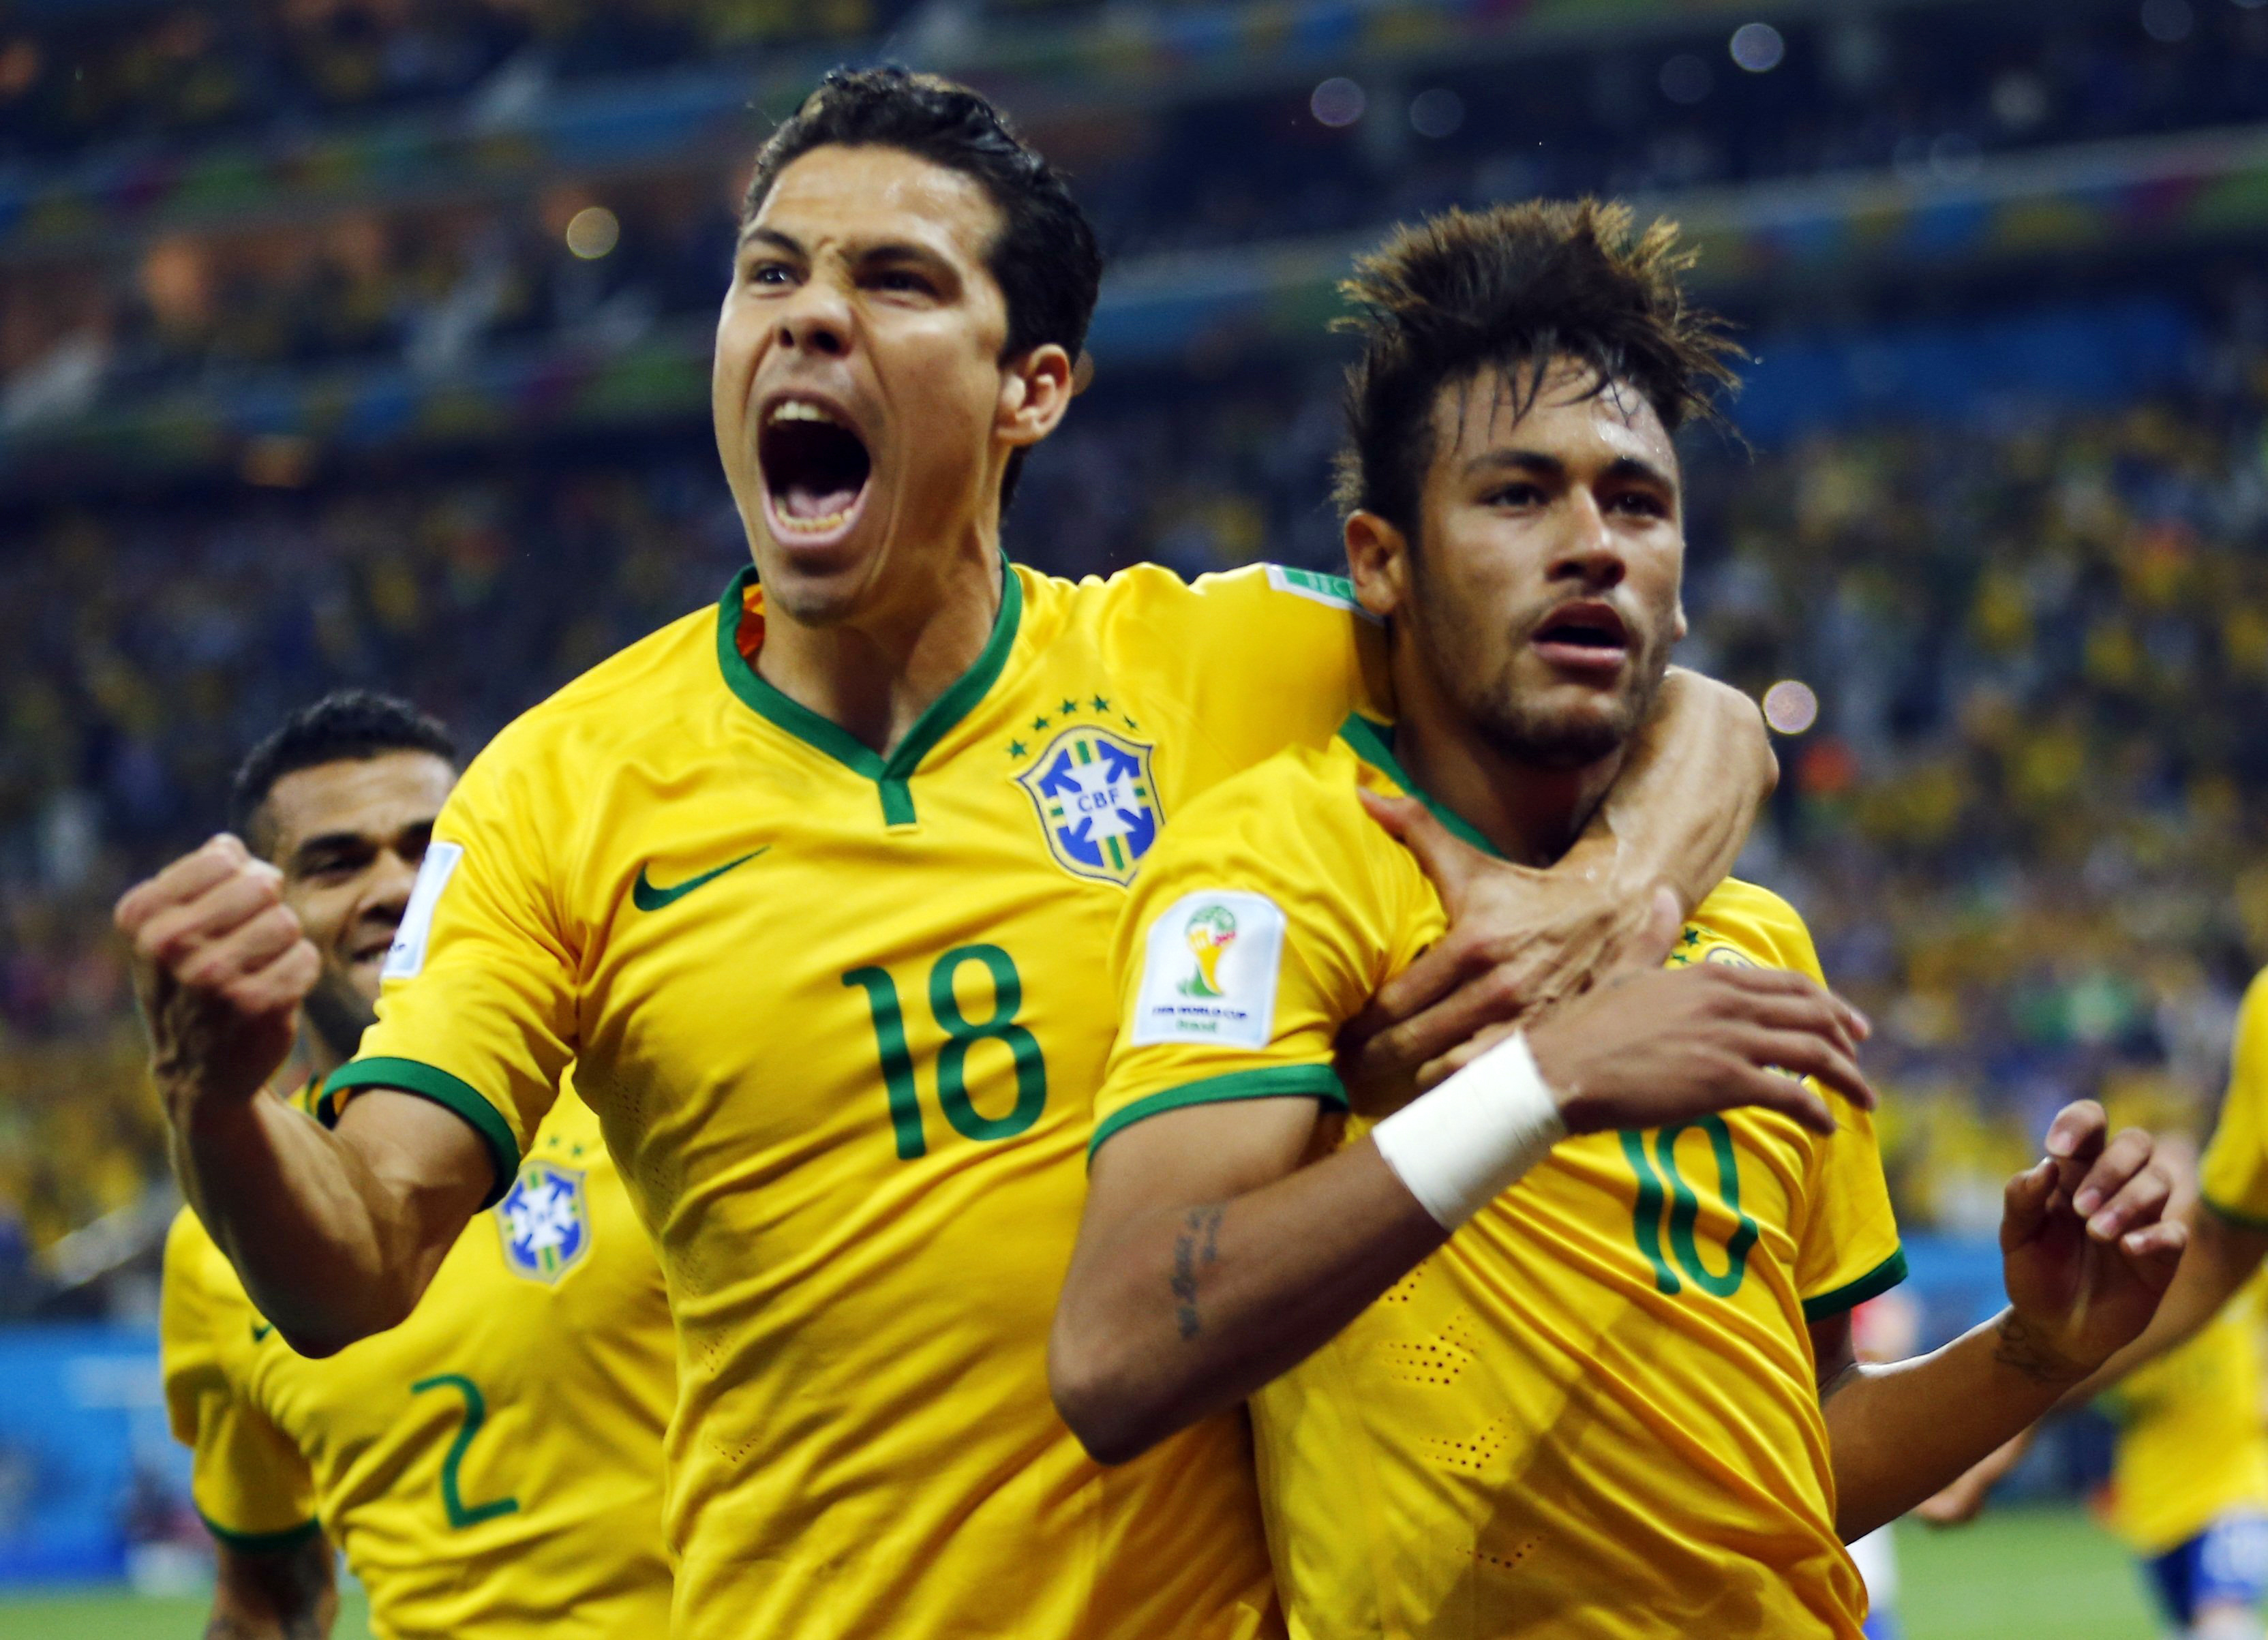 Brazil's Neymar (R) and Hernanes celebrate after Neymar scored a goal from a penalty kick during the 2014 World Cup opening match against Croatia at the Corinthians arena in Sao Paulo, June 12, 2014. (Ivan Alvarado—Reuters)